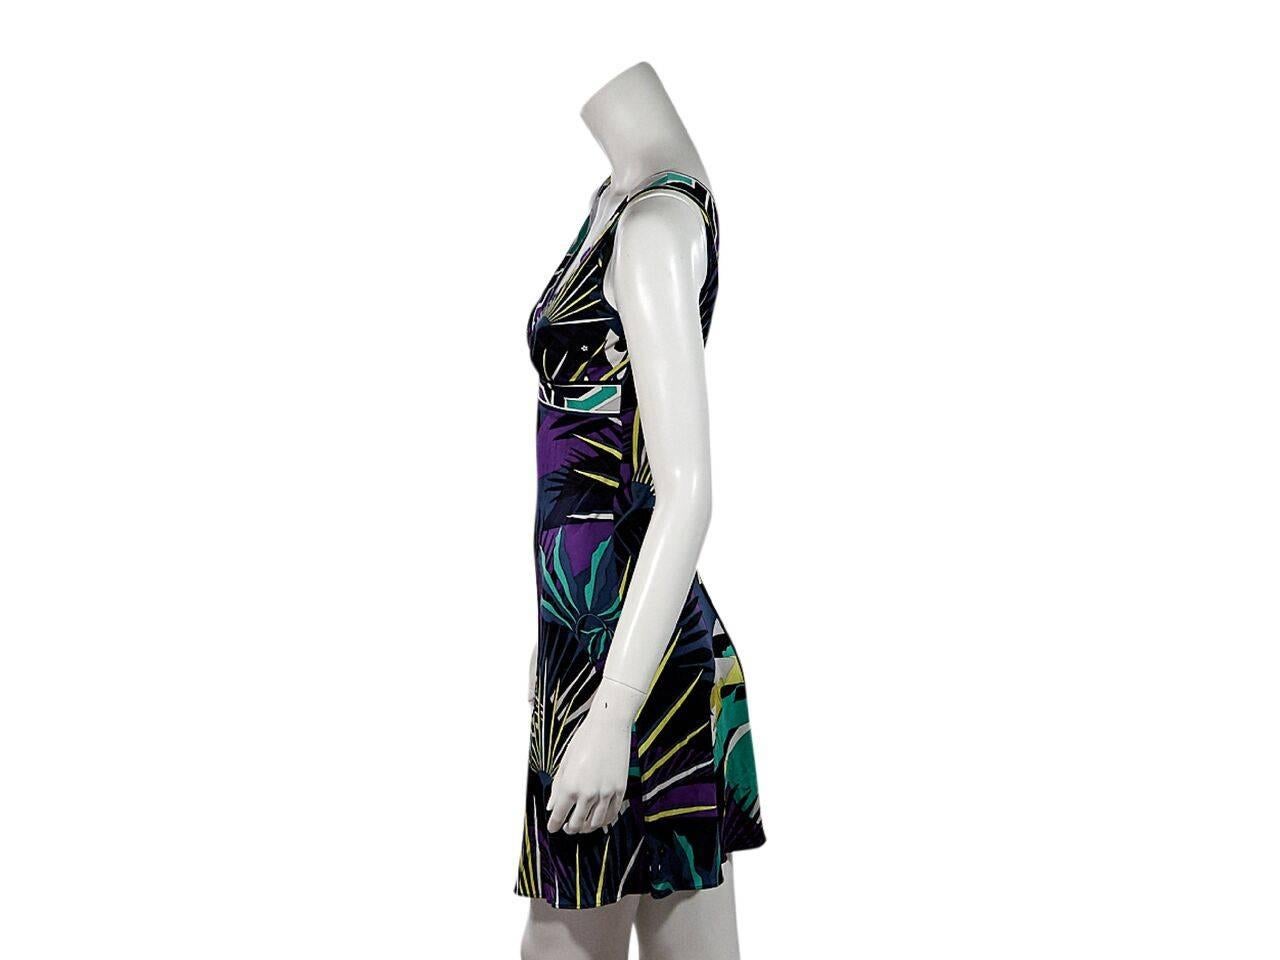 Product details:  Multicolor printed mini dress by Emilio Pucci.  Double v-neck.  Sleeveless.  Banded Empire waist.  Pullover style. 
Condition: Pre-owned. Very good.
Est. Retail $ 438.00